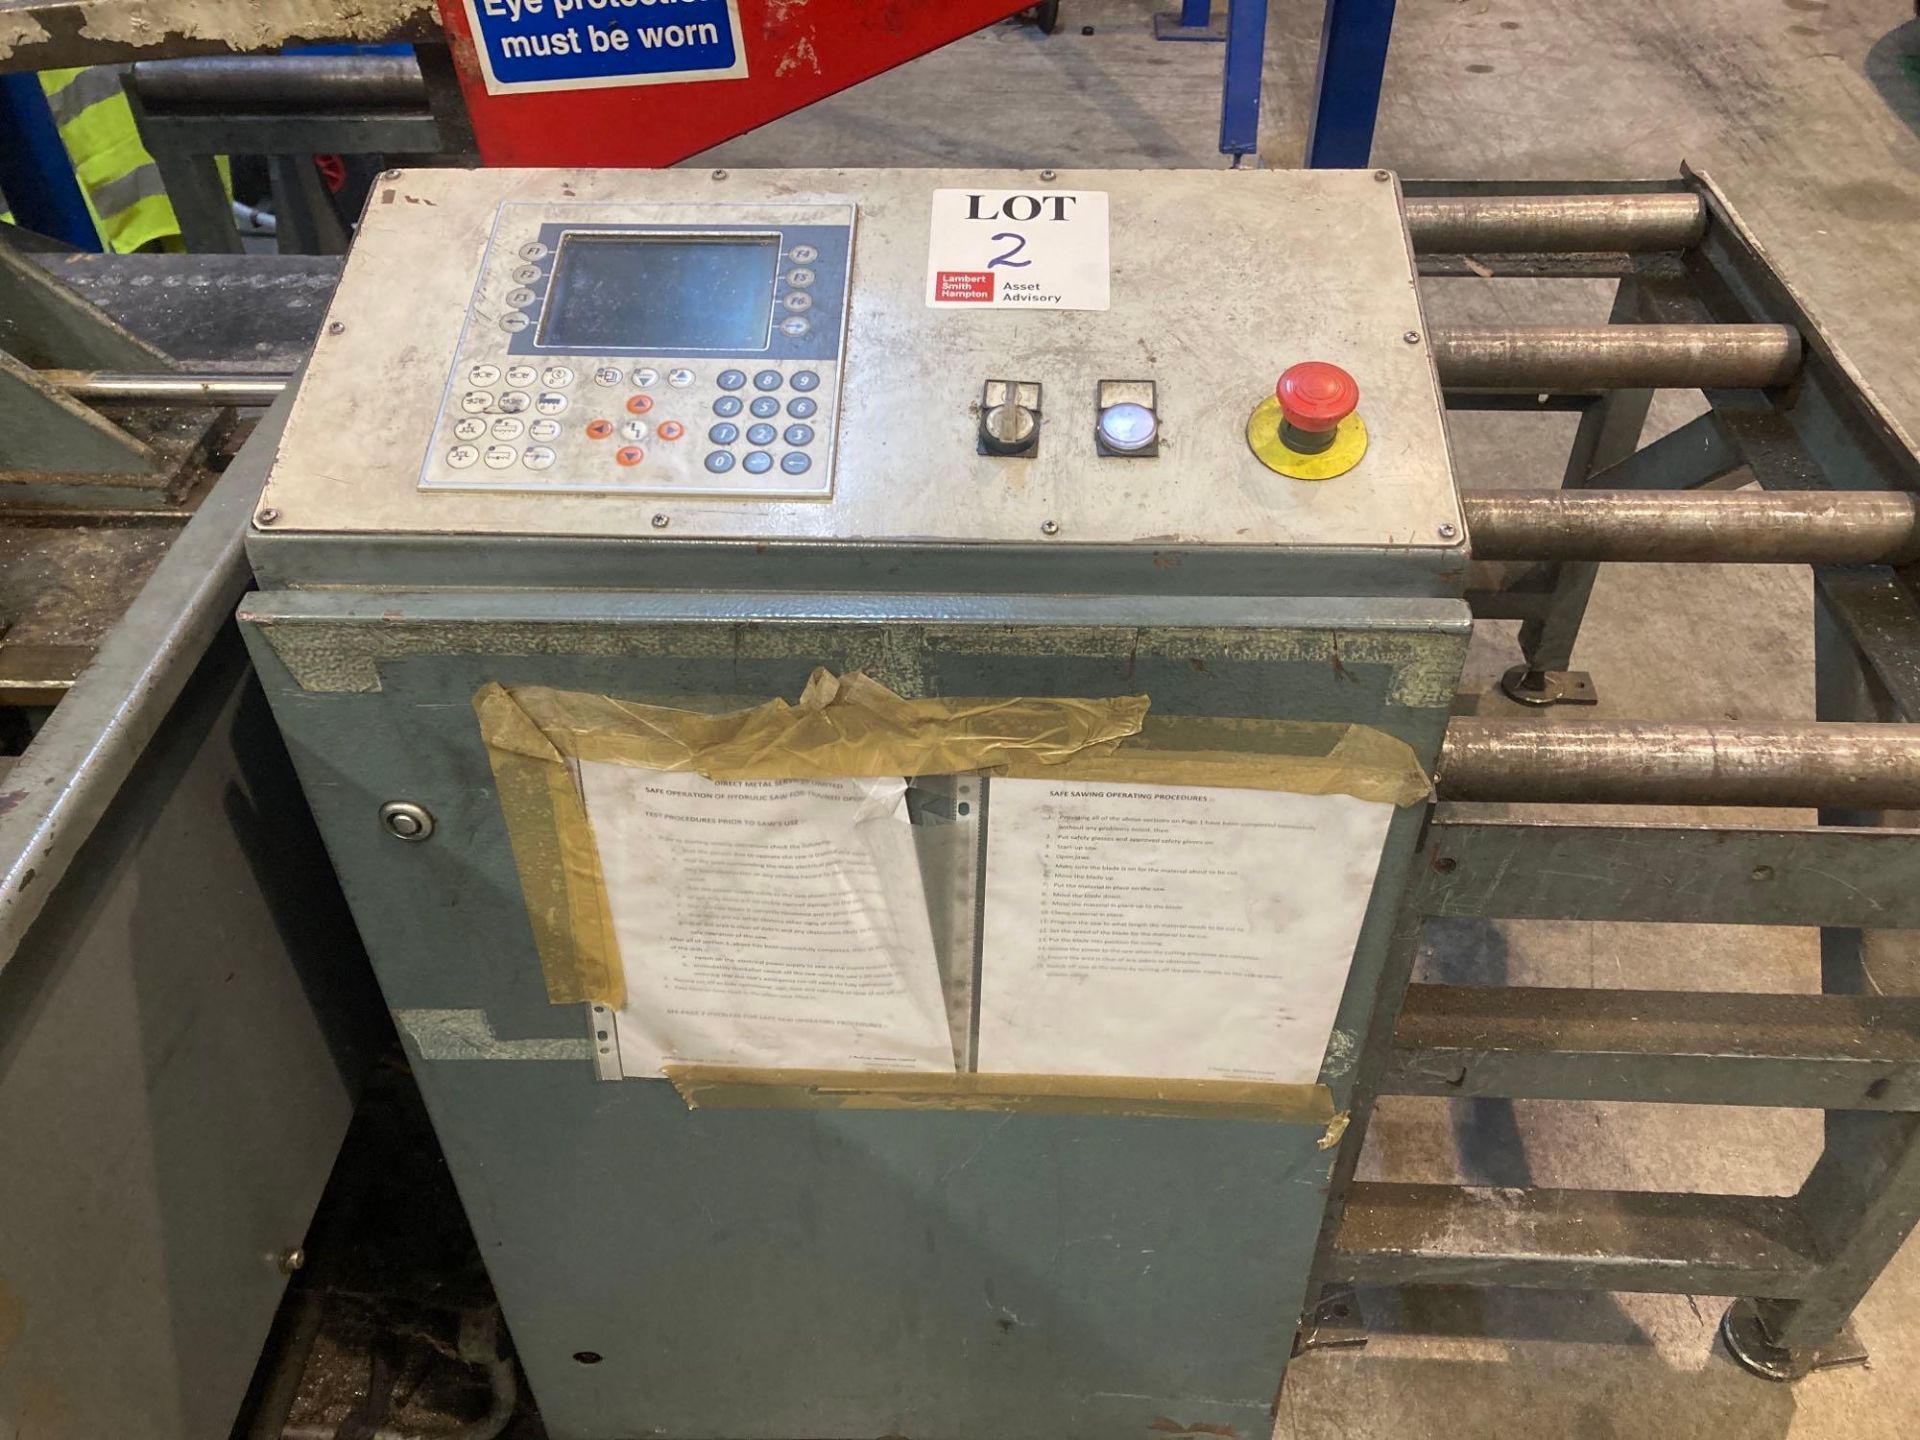 TMJ PP362 CNC double column band saw, (please note three phase, electrical disconnection will be - Image 7 of 8